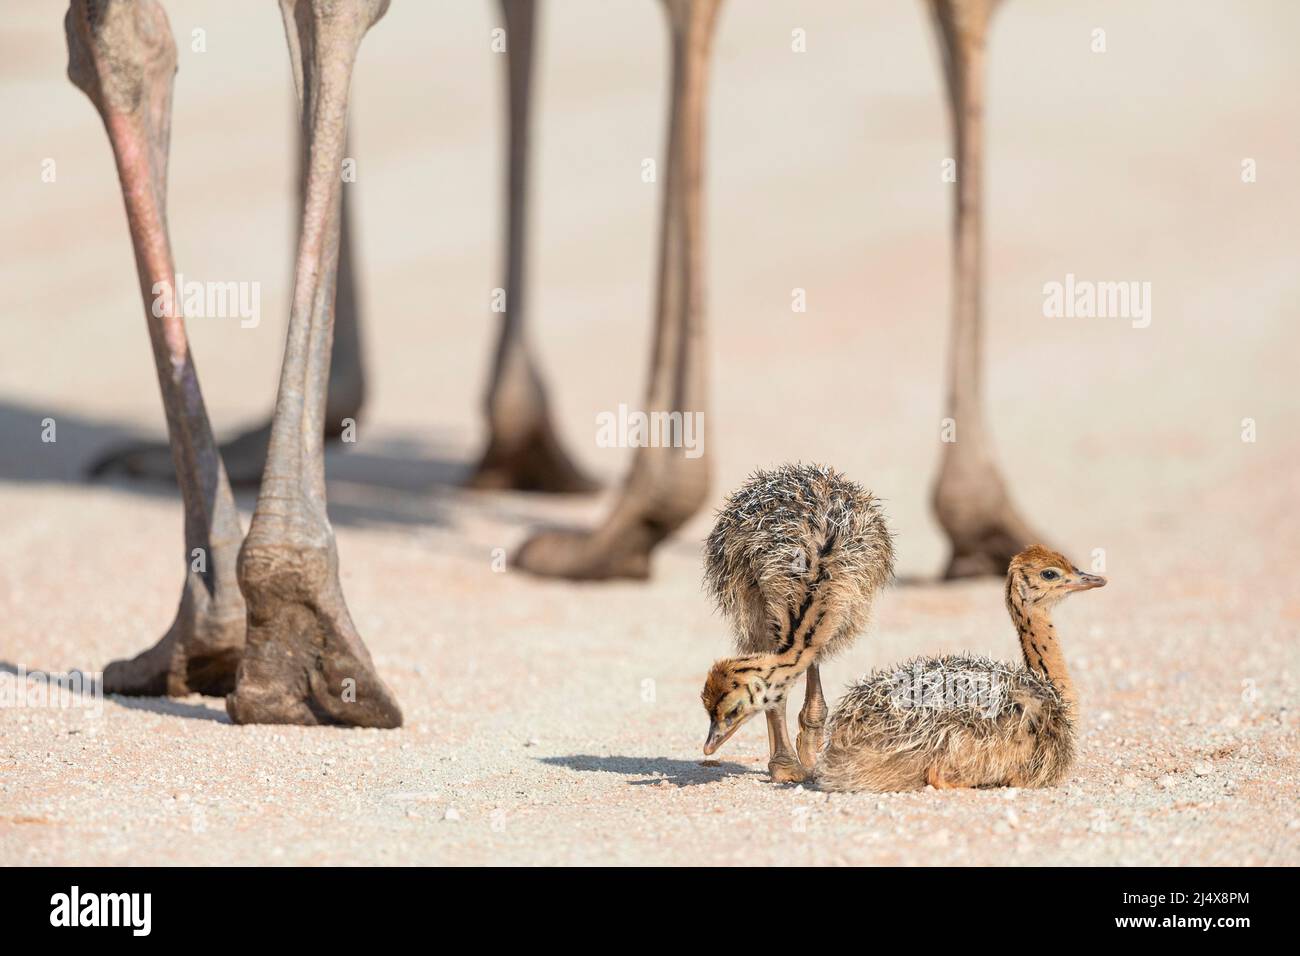 Ostrich (Struthio camelus) chicks, Kgalagadi transfrontier park, South Africa, January 2022 Stock Photo